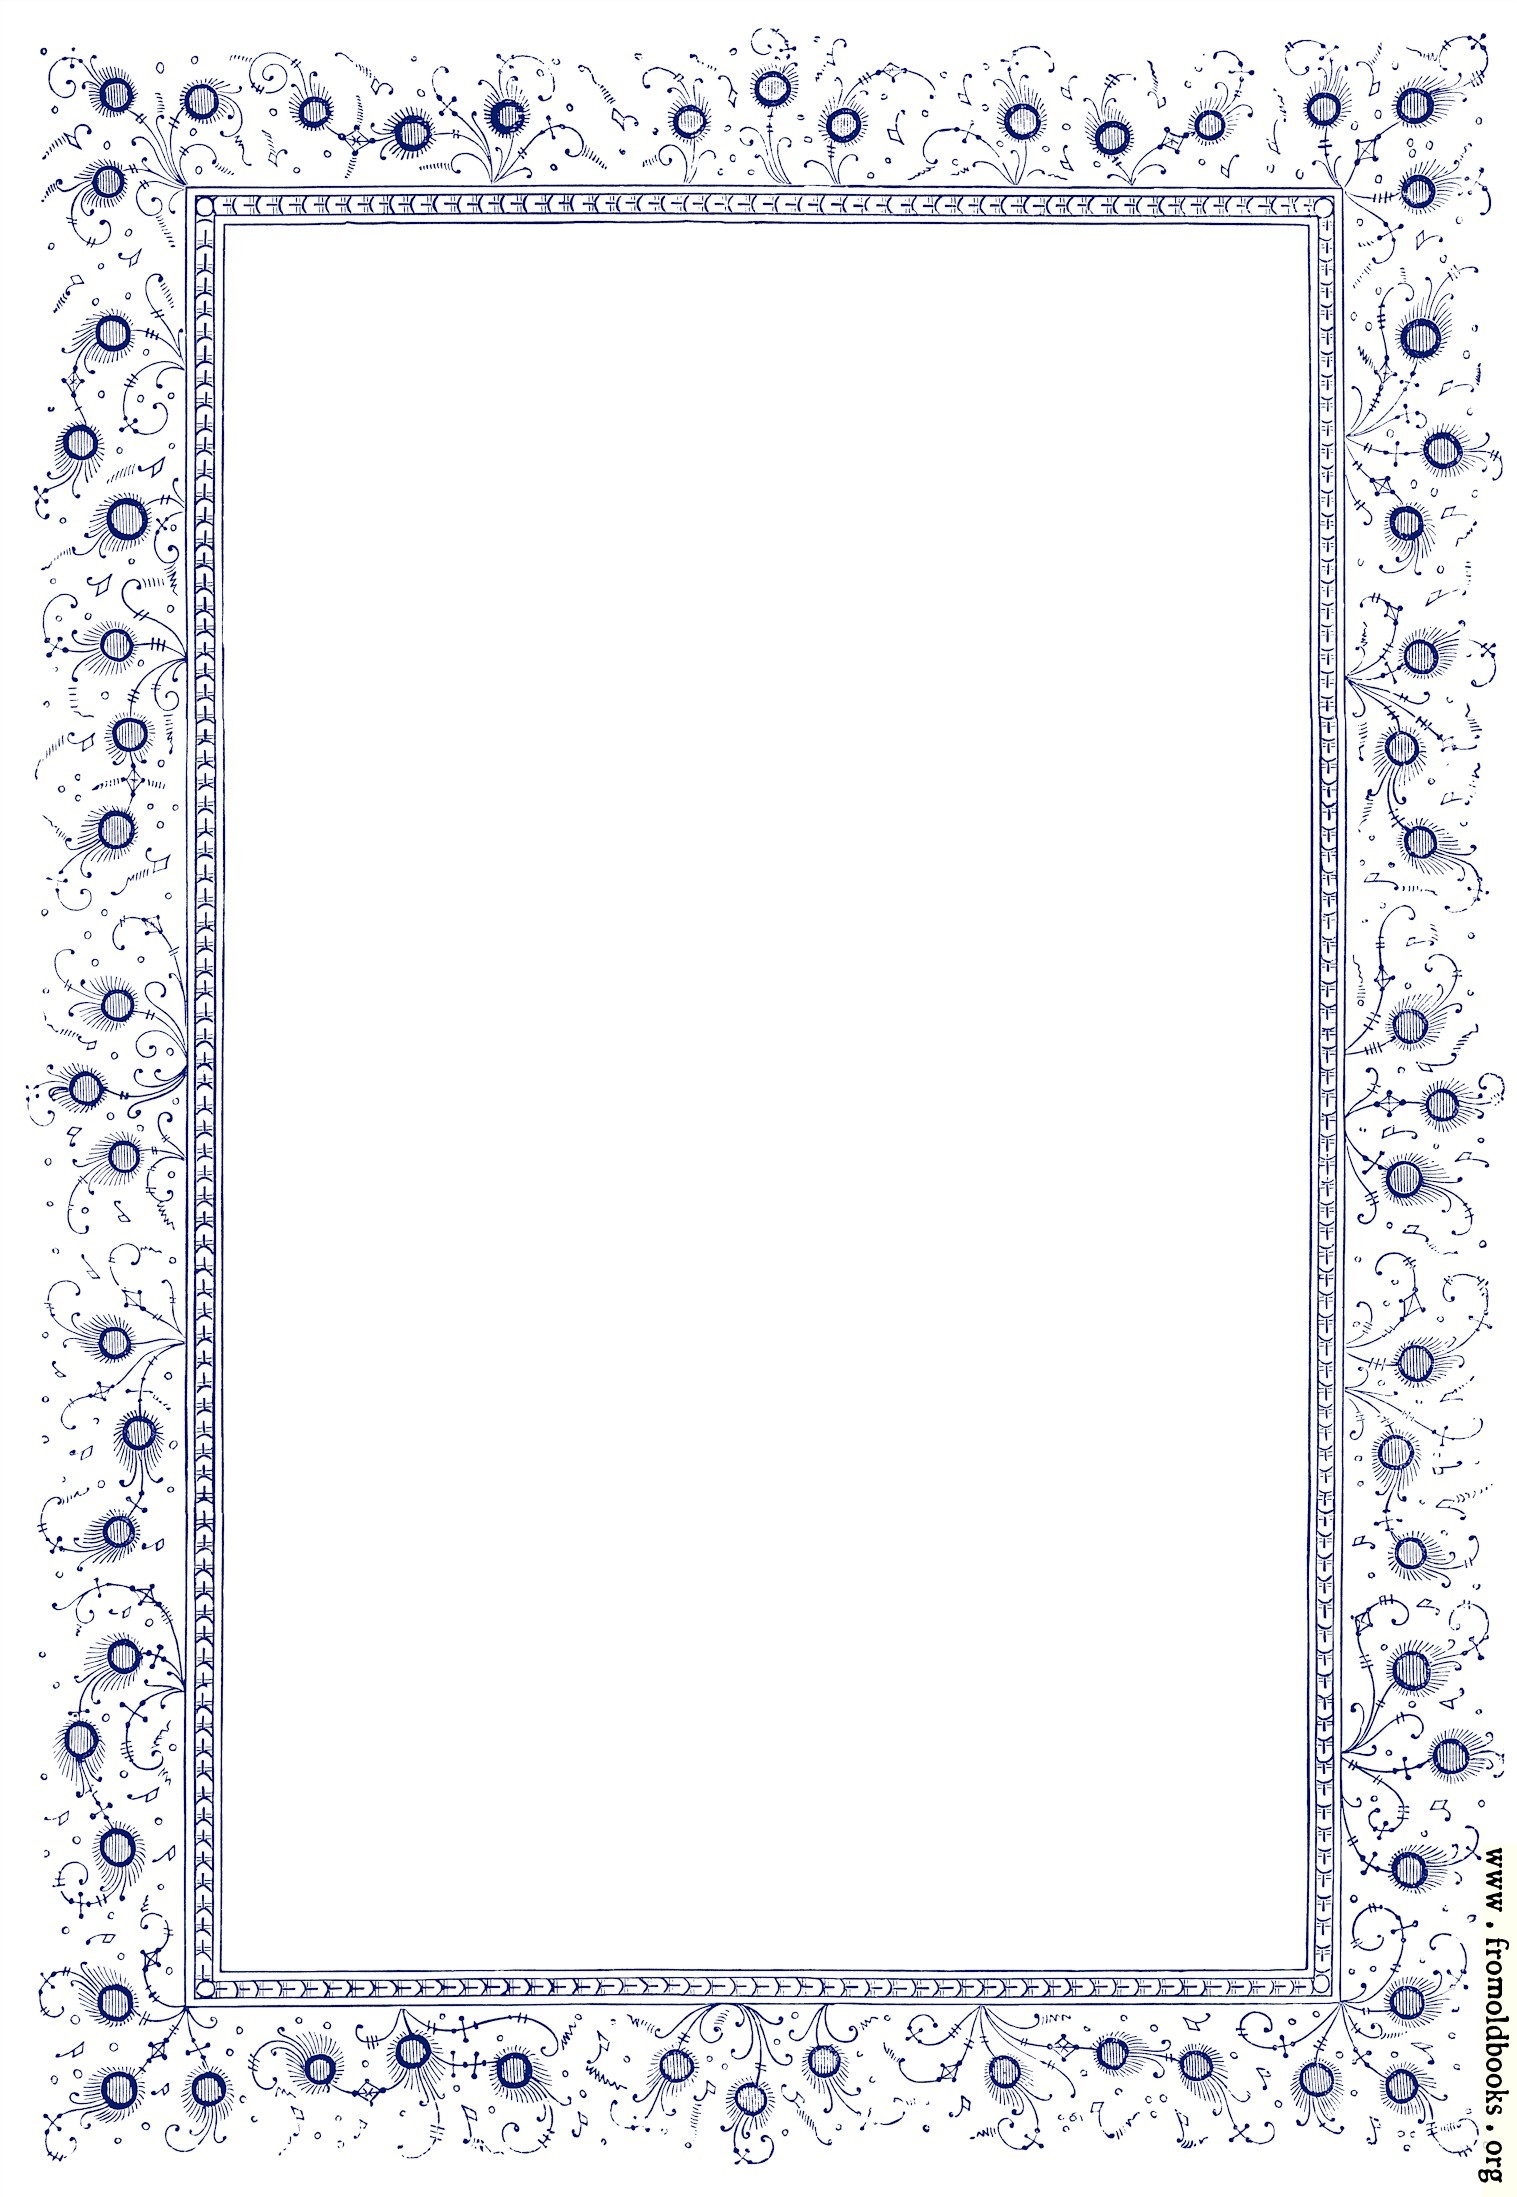 [Picture: Vintage border with peacock-feather style flowers, in blue]